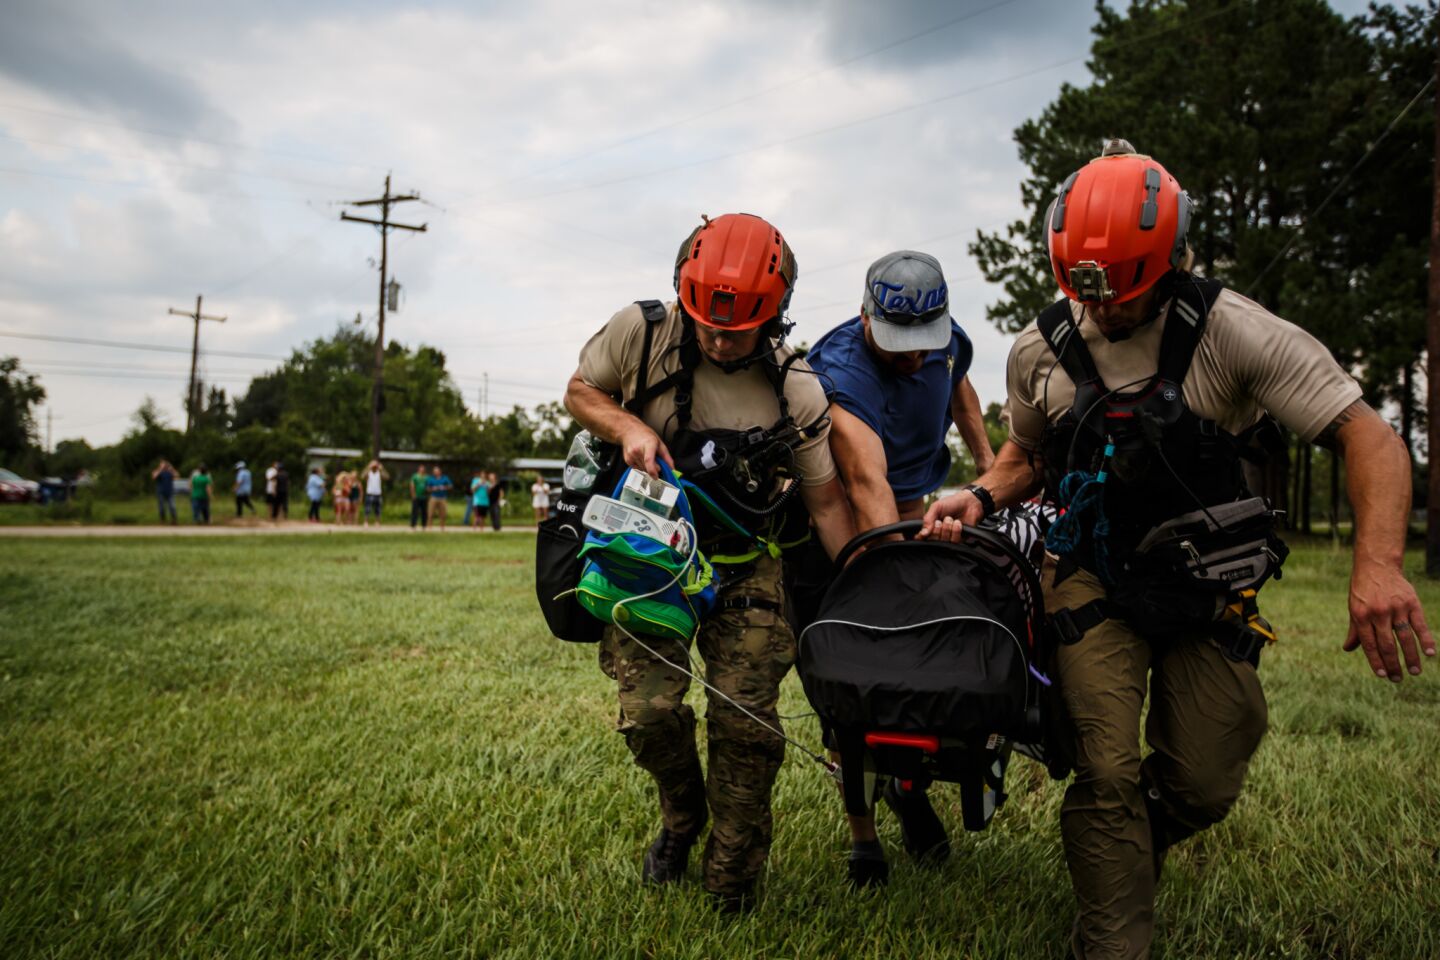 Members of the California Air National Guard 129th Rescue Wing, Senior Airman George McKenzie, left, and Master Sgt. Adam Vanhaaster, right, help a man carry his infant, who has a serious medical condition, to a hospital in Orange, Texas.